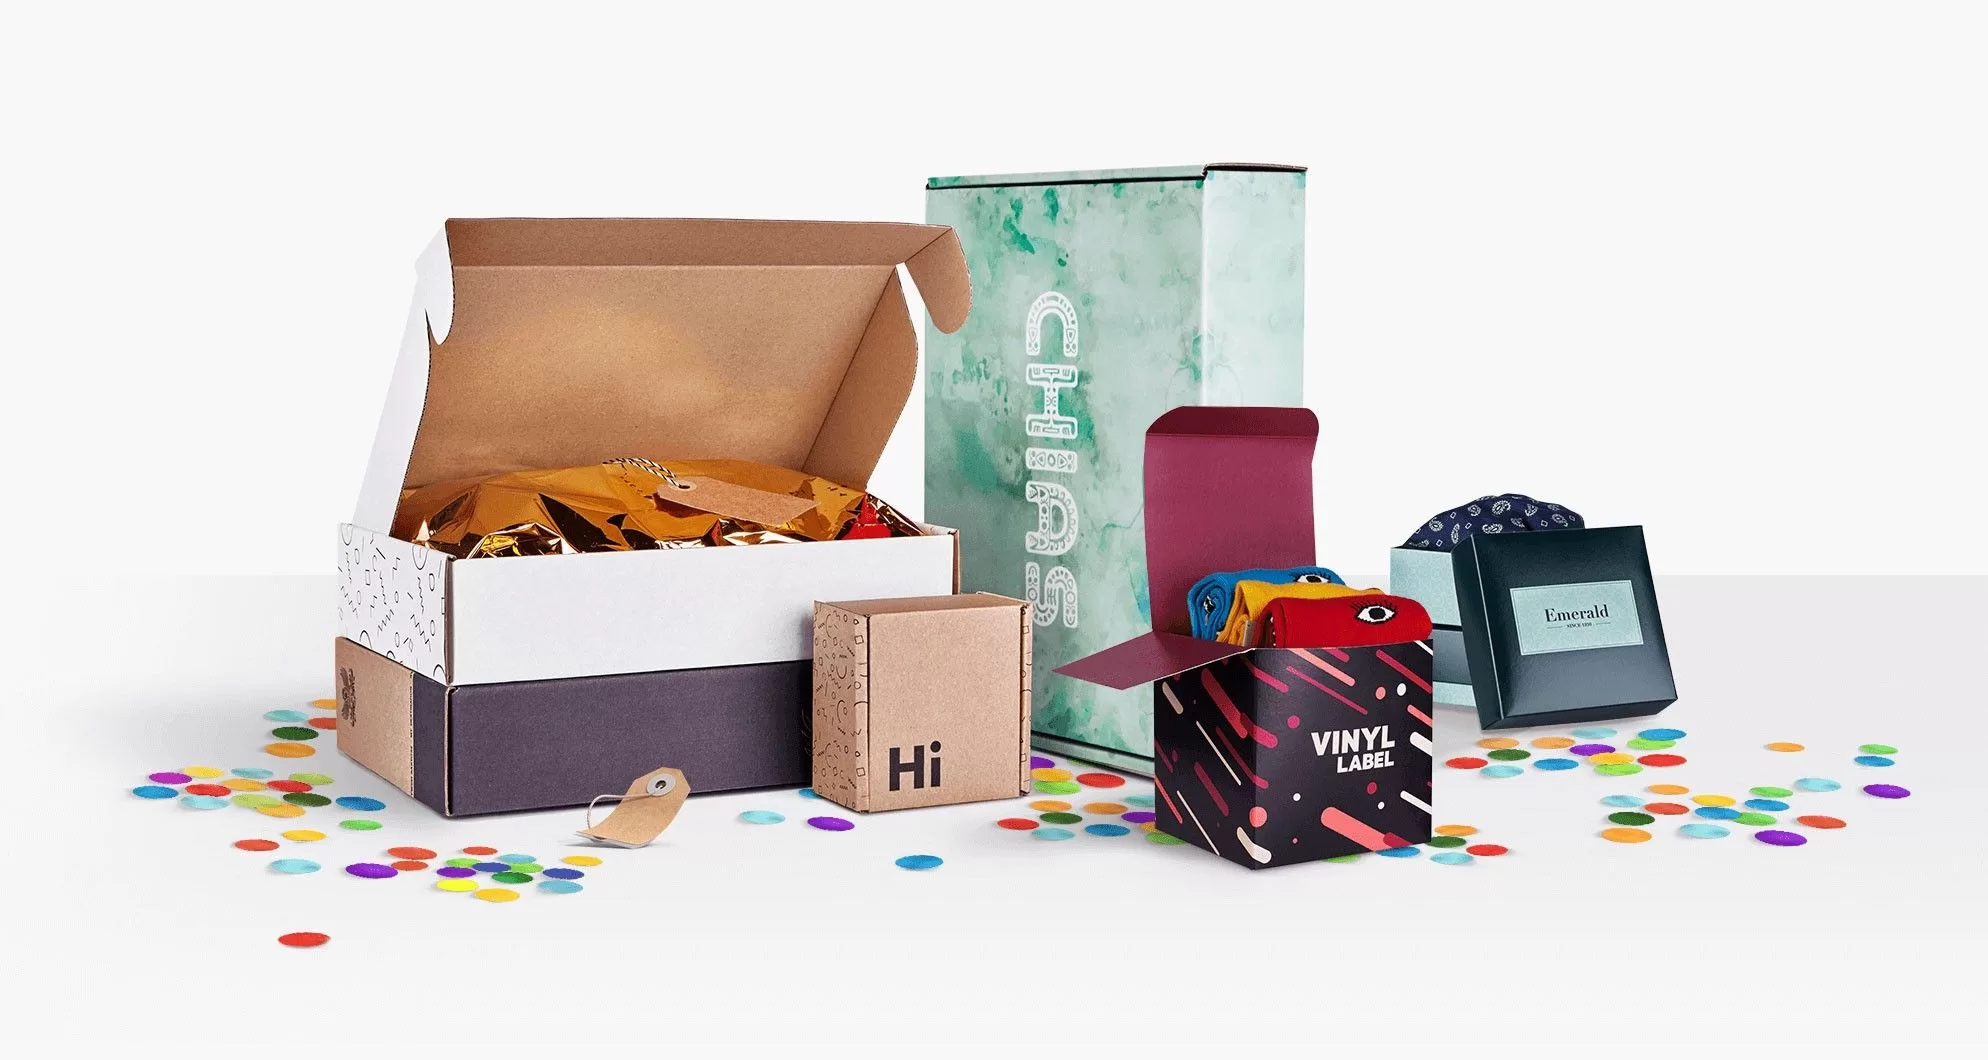 4 Cool Product Packaging Ideas to Inspire Your Brand